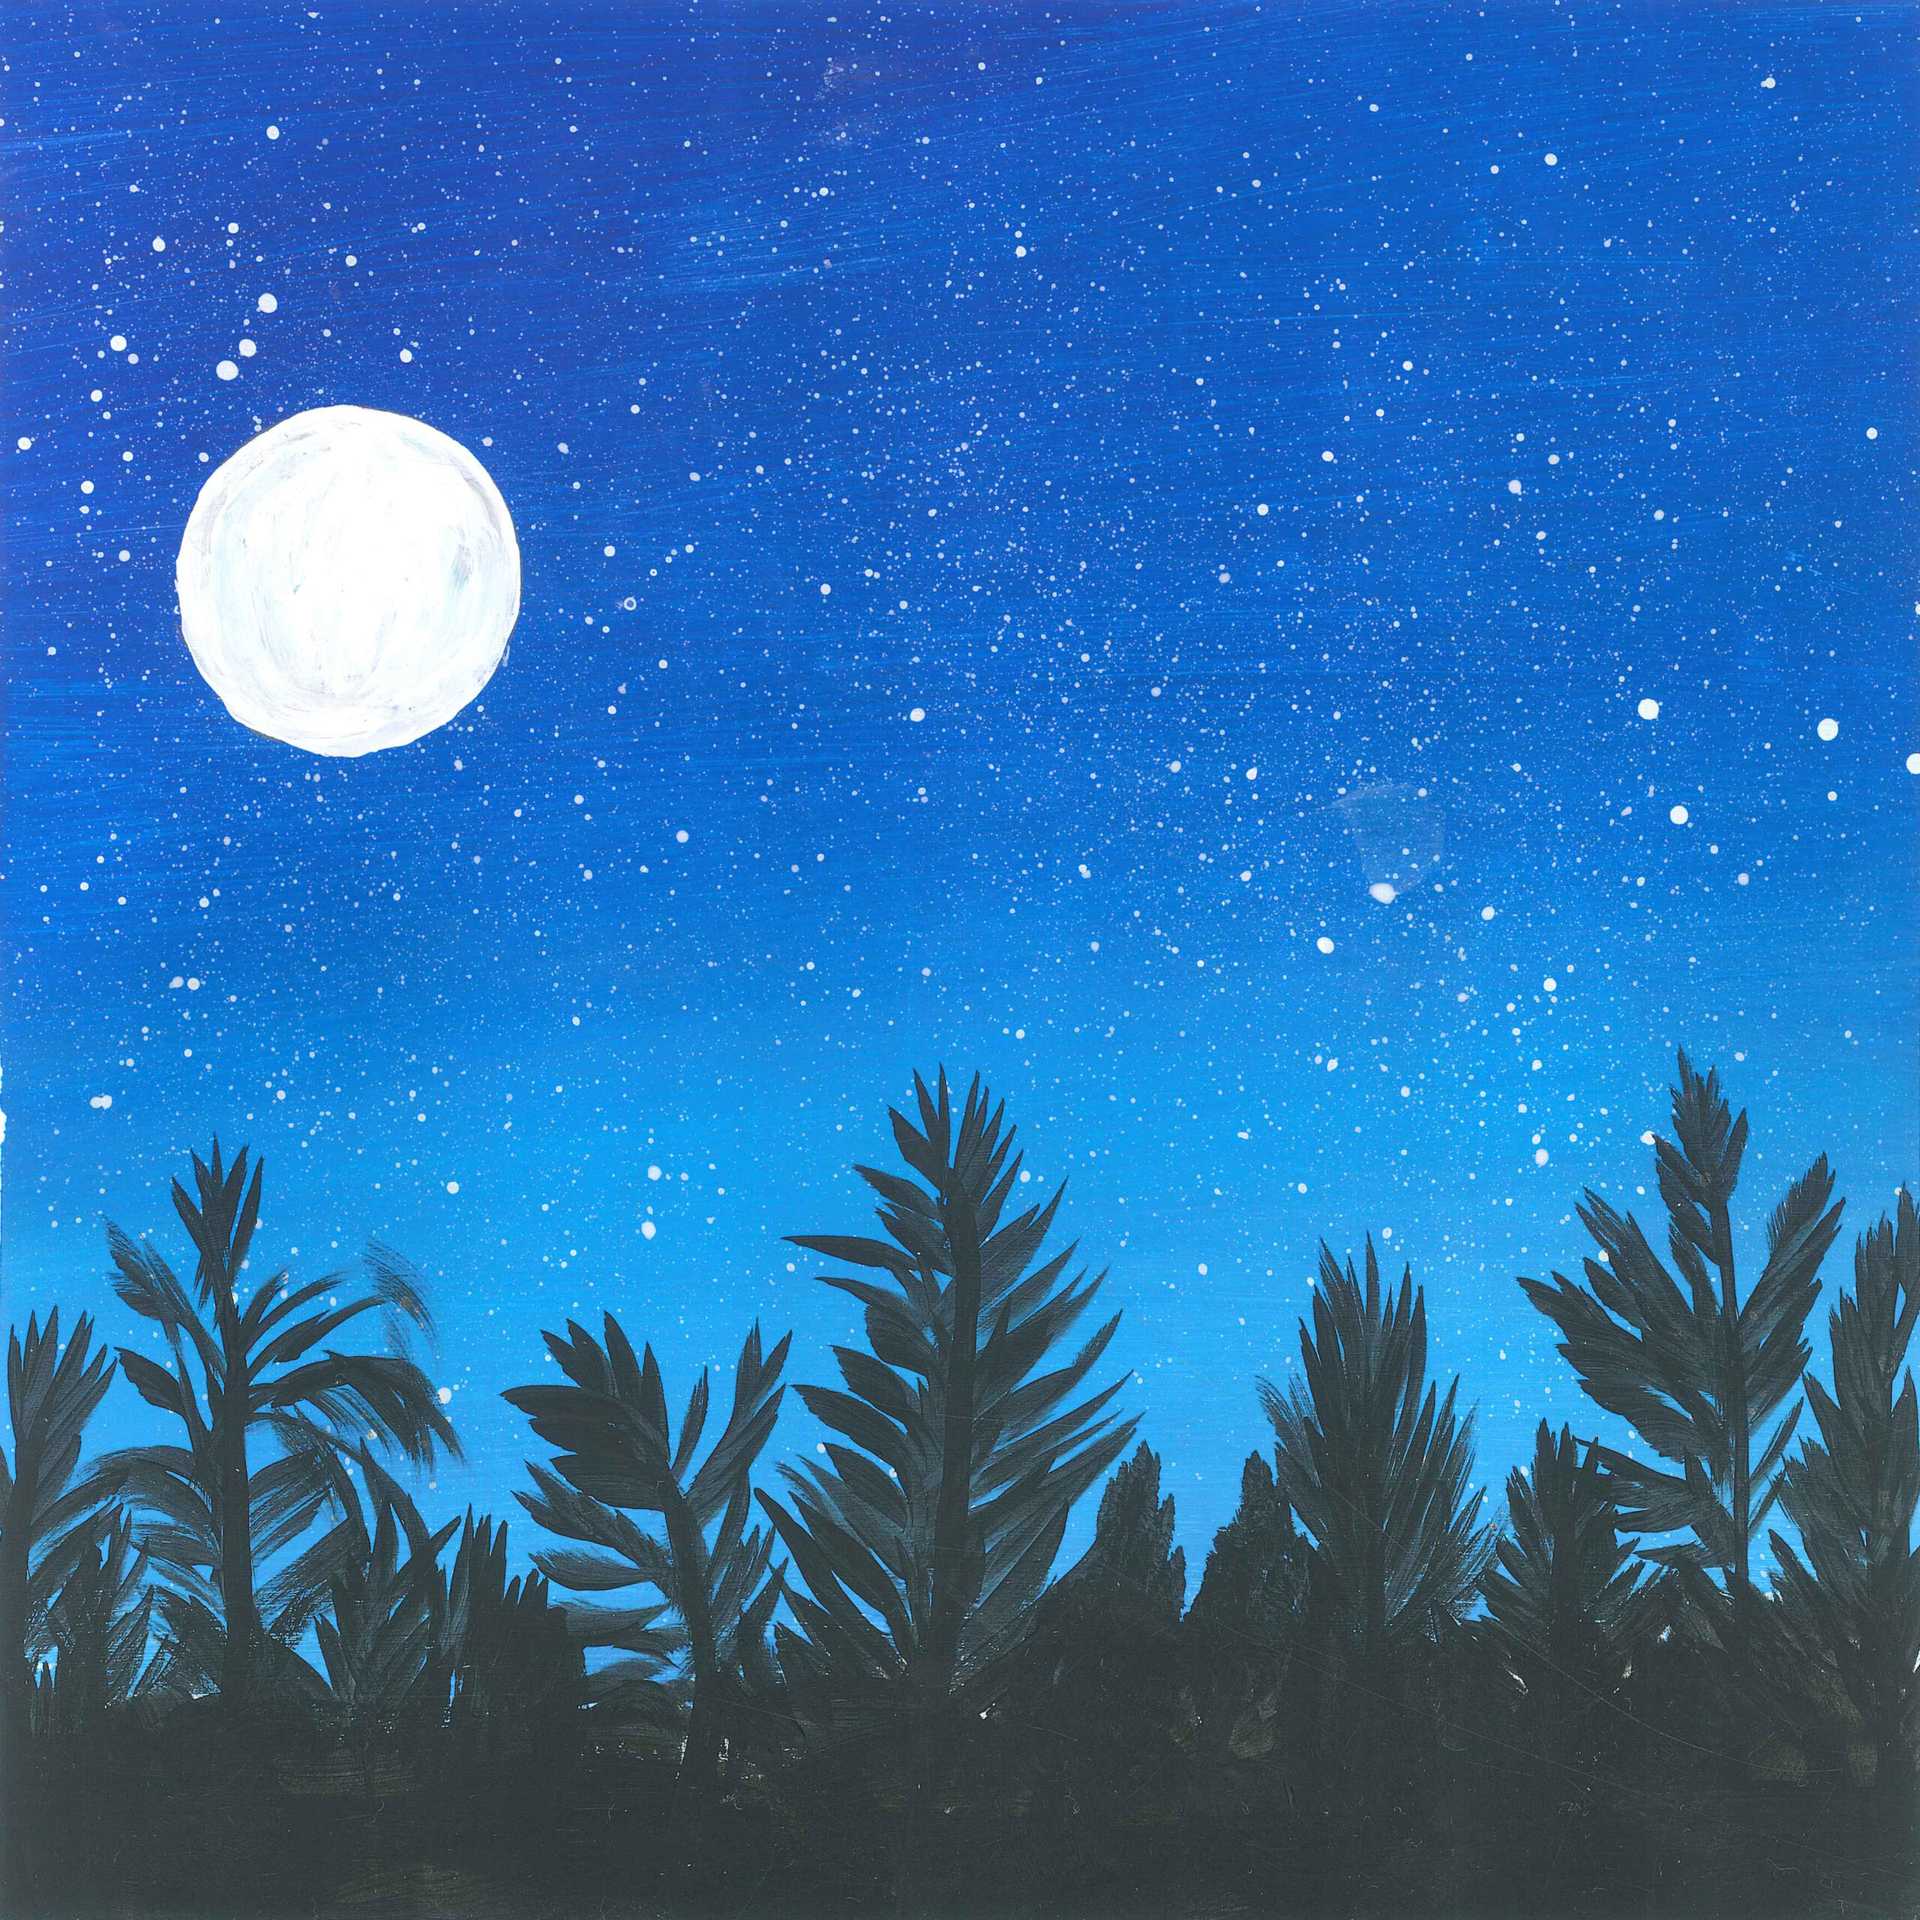 Owls in the Summer Night - nature landscape painting - earth.fm